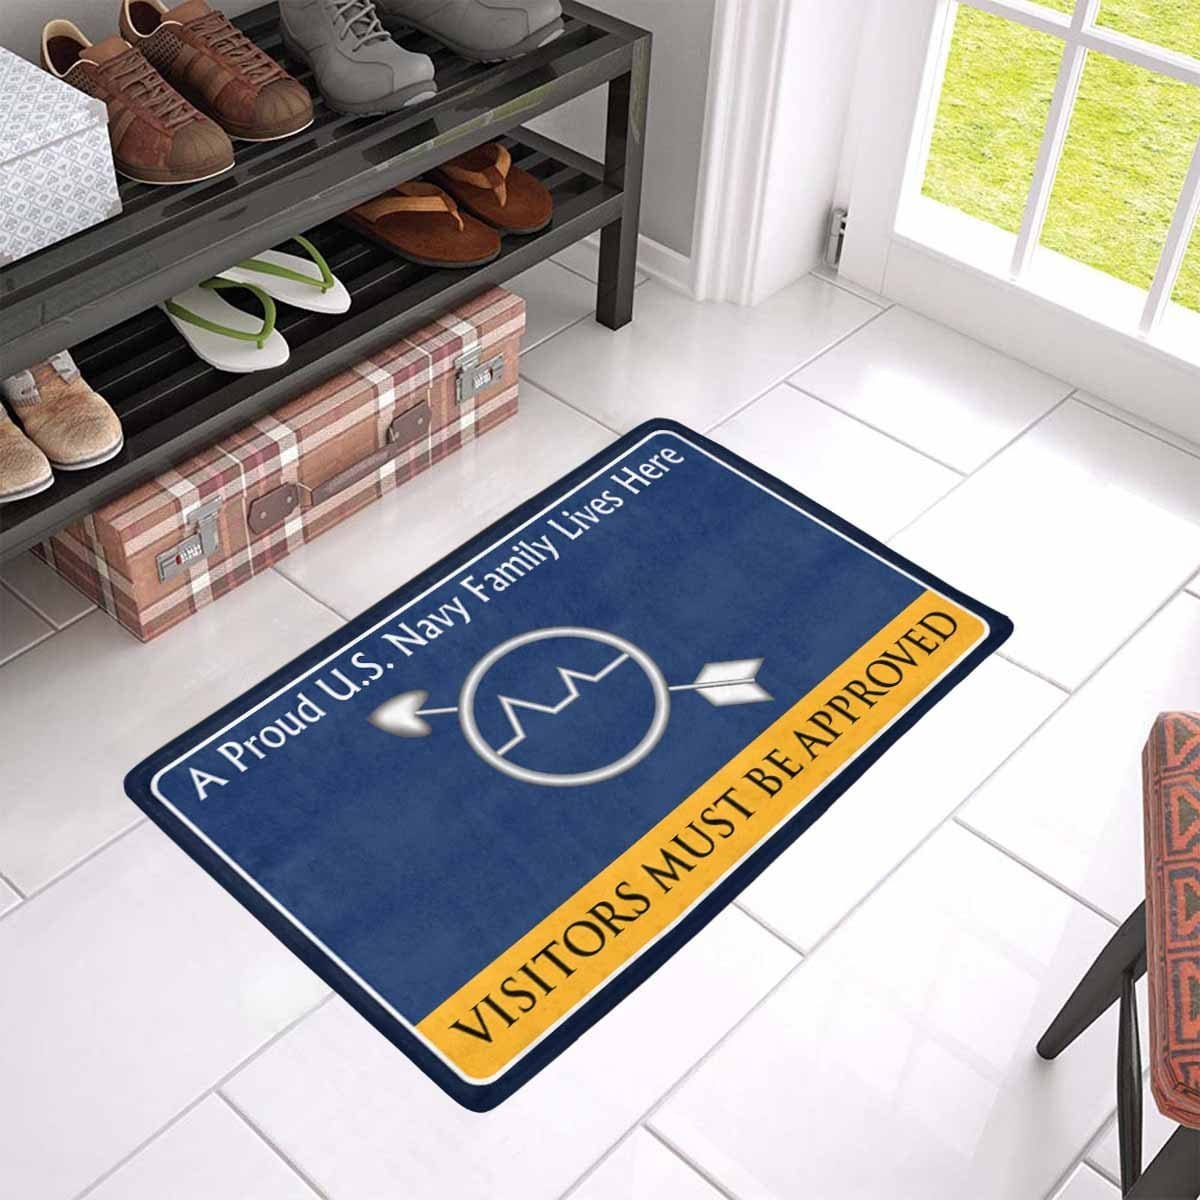 U.S Navy Operations specialist Navy OS Family Doormat - Visitors must be approved (23,6 inches x 15,7 inches)-Doormat-Navy-Rate-Veterans Nation